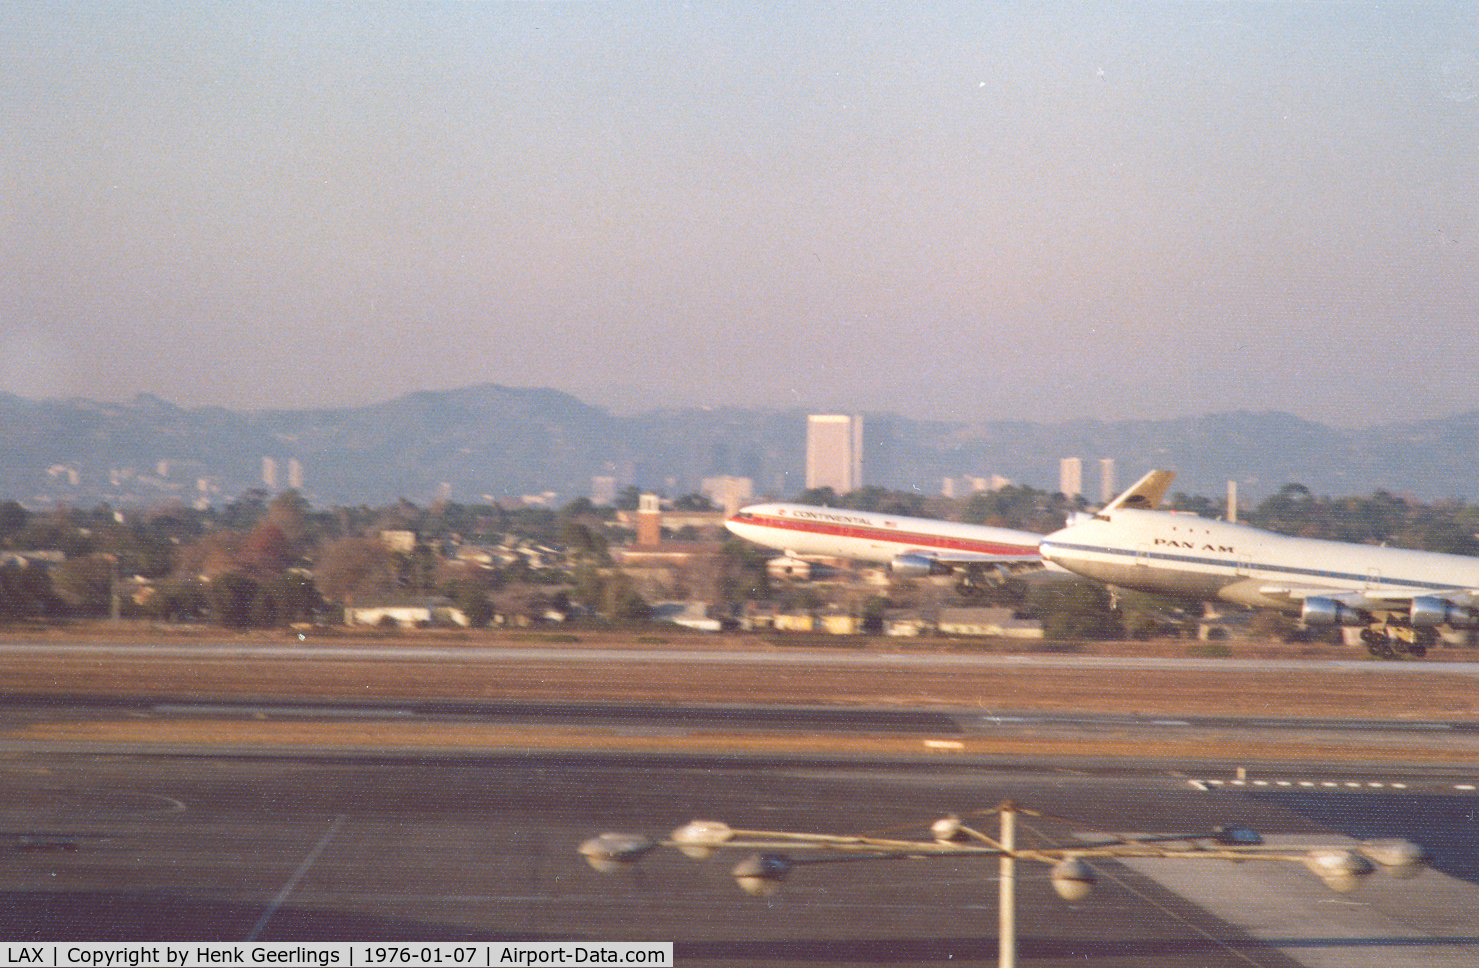 Los Angeles International Airport (LAX) - On Final , LAX airport '1976